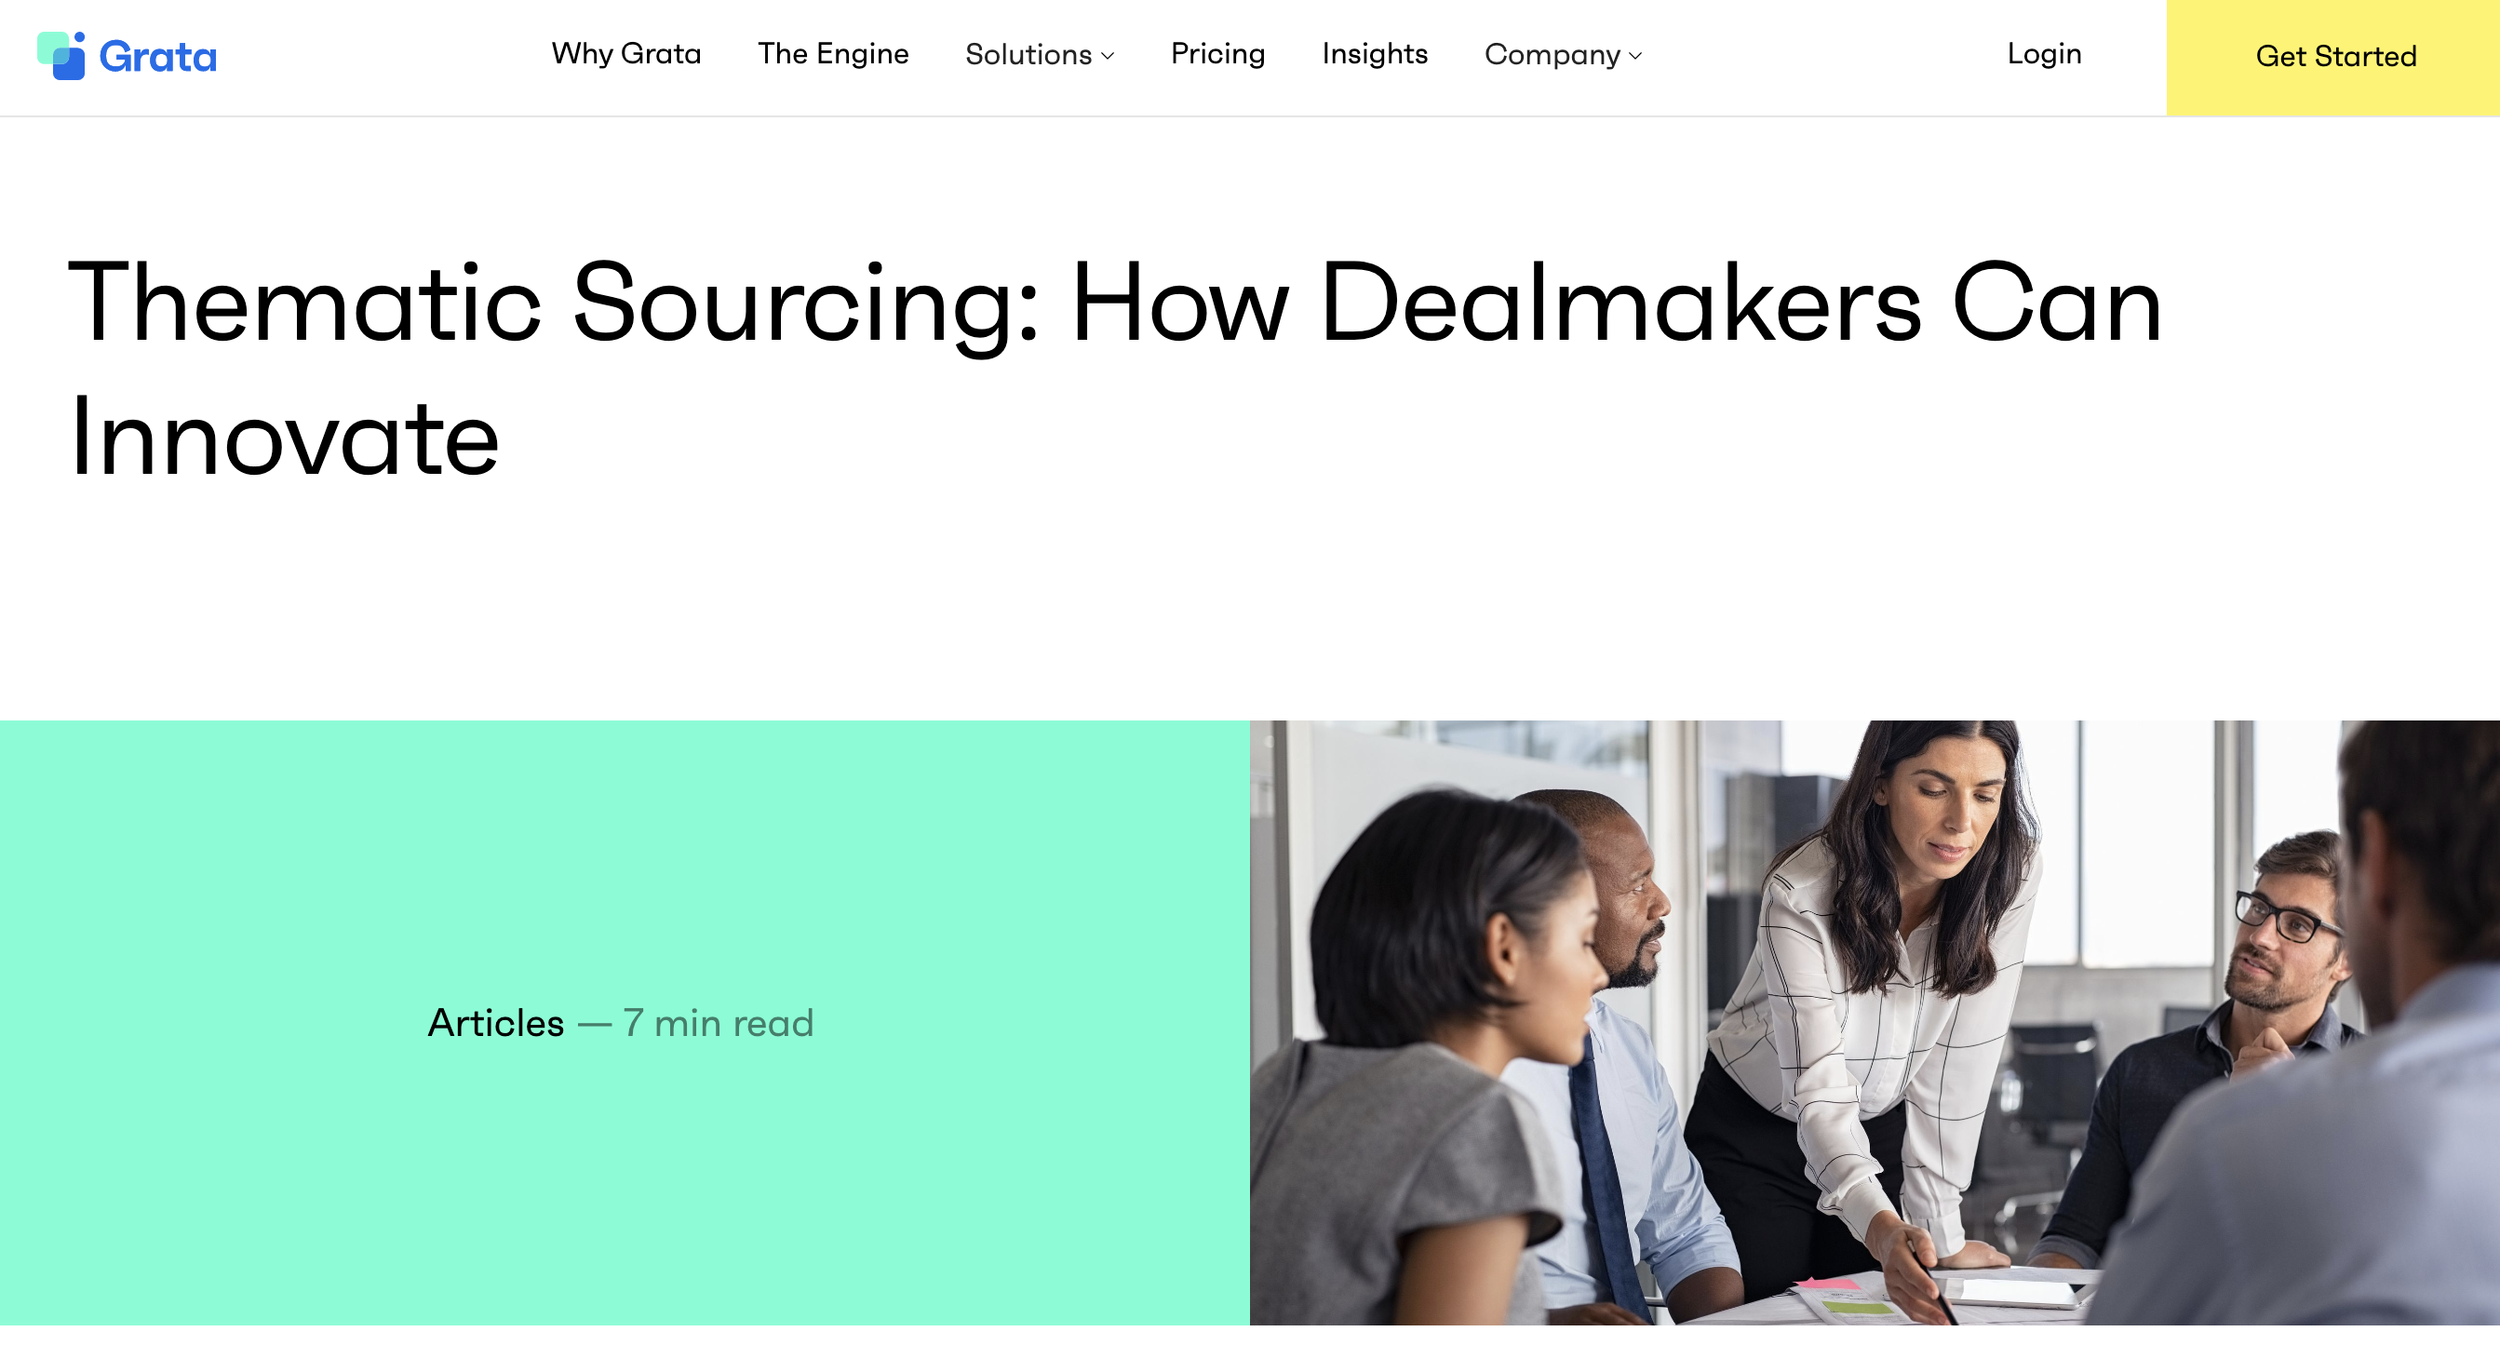 Thematic Sourcing - How Dealmakers Can Innovate.png